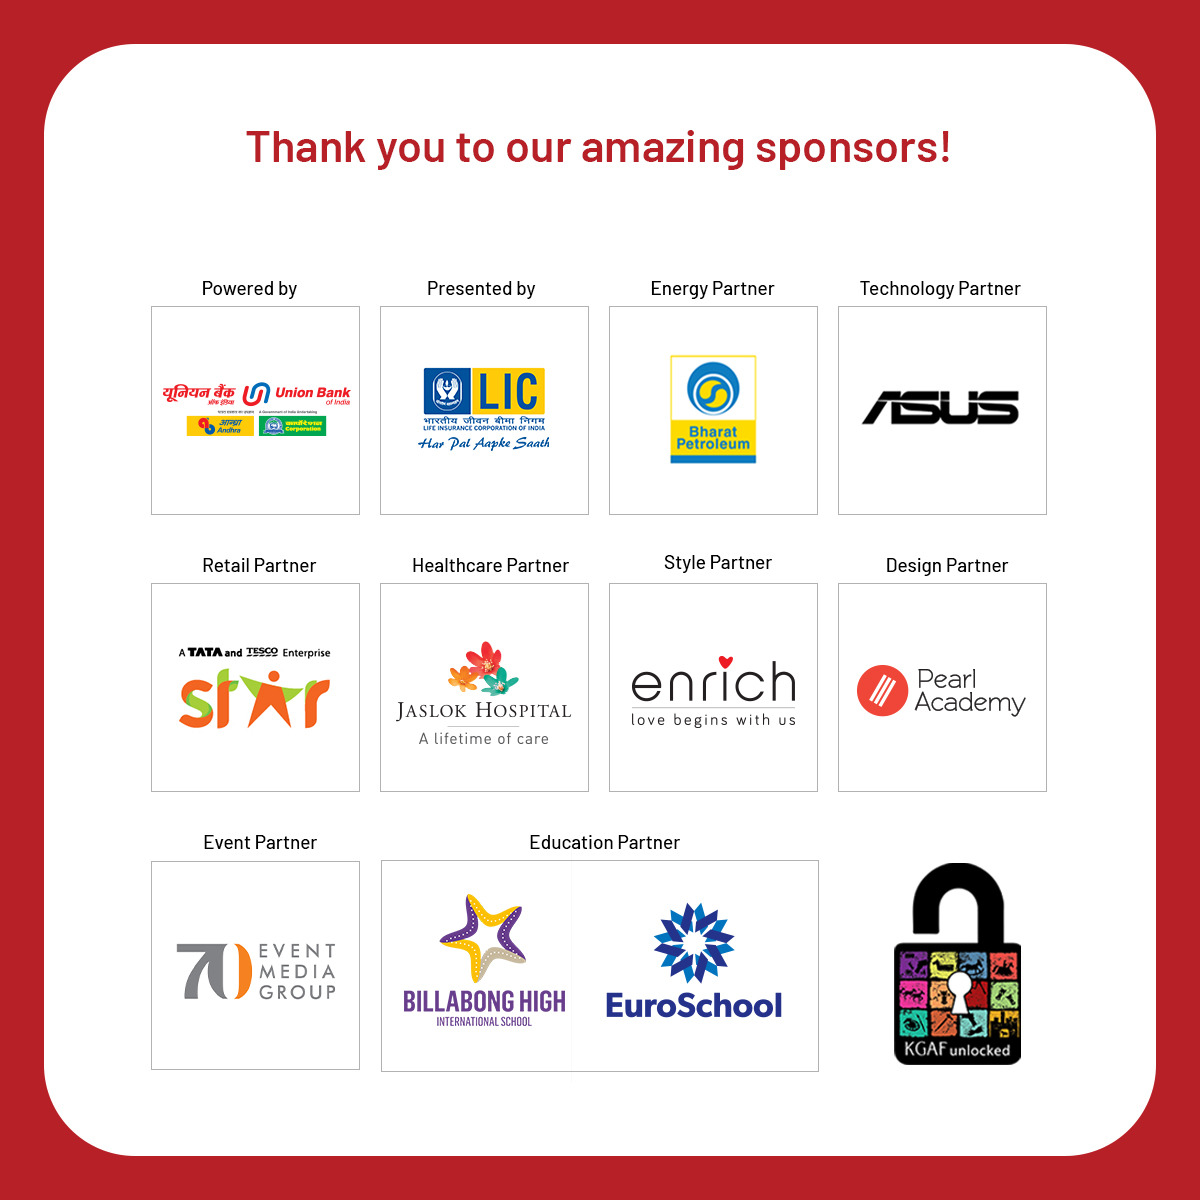 We'd like to express our gratitude to our amazing sponsors for all their support!! 

#KGAF2021 #KalaGhodaArtsFestival #KGAFUnlocked